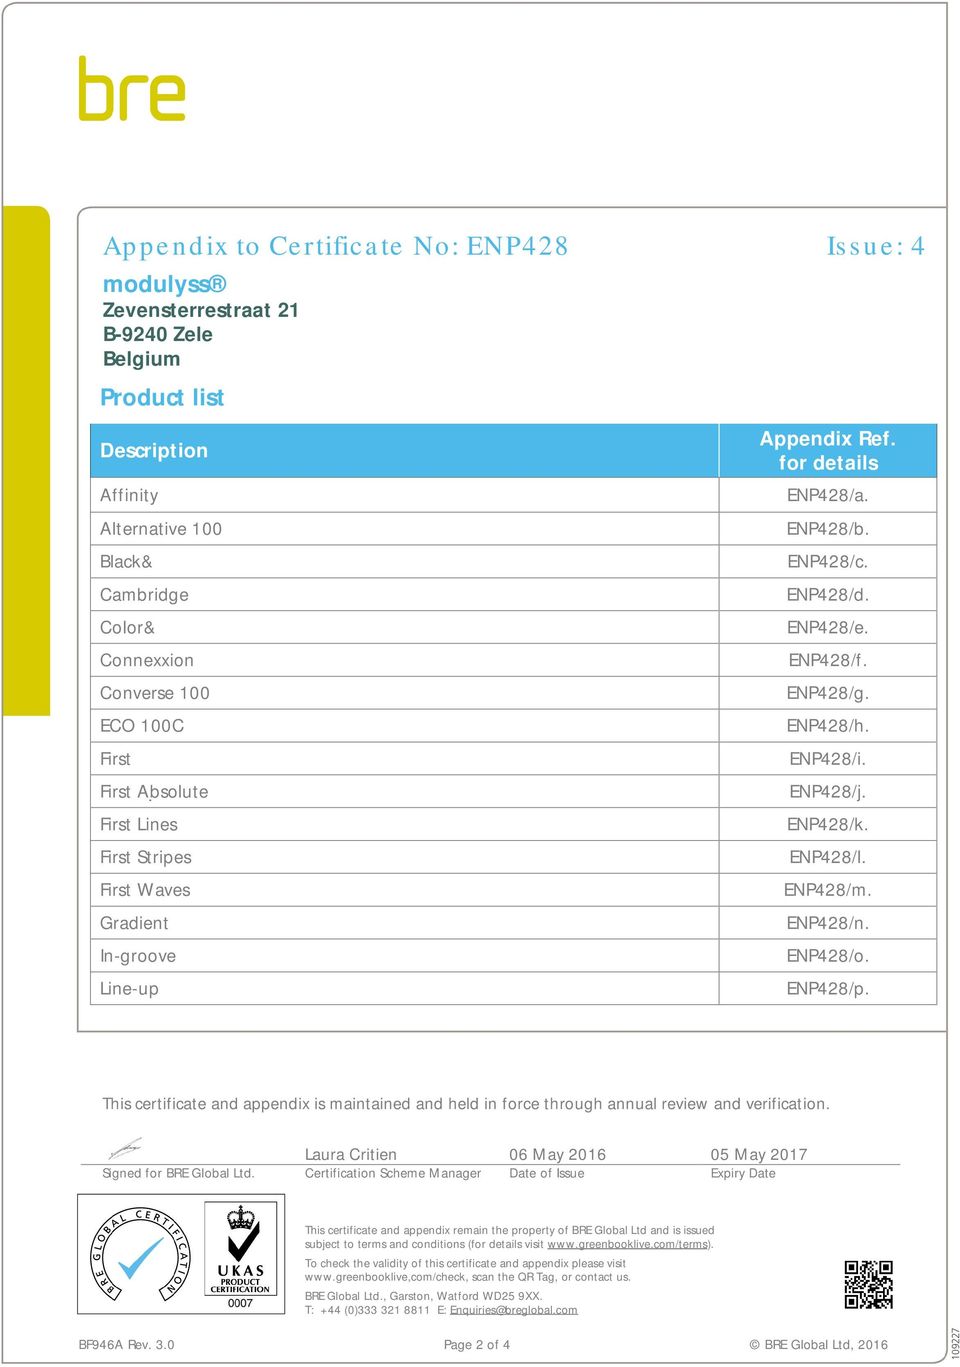 ENP428/i. ENP428/j. ENP428/k. ENP428/l. ENP428/m. ENP428/n. ENP428/o. ENP428/p. This certificate and appendix is maintained and held in force through annual review and verification.